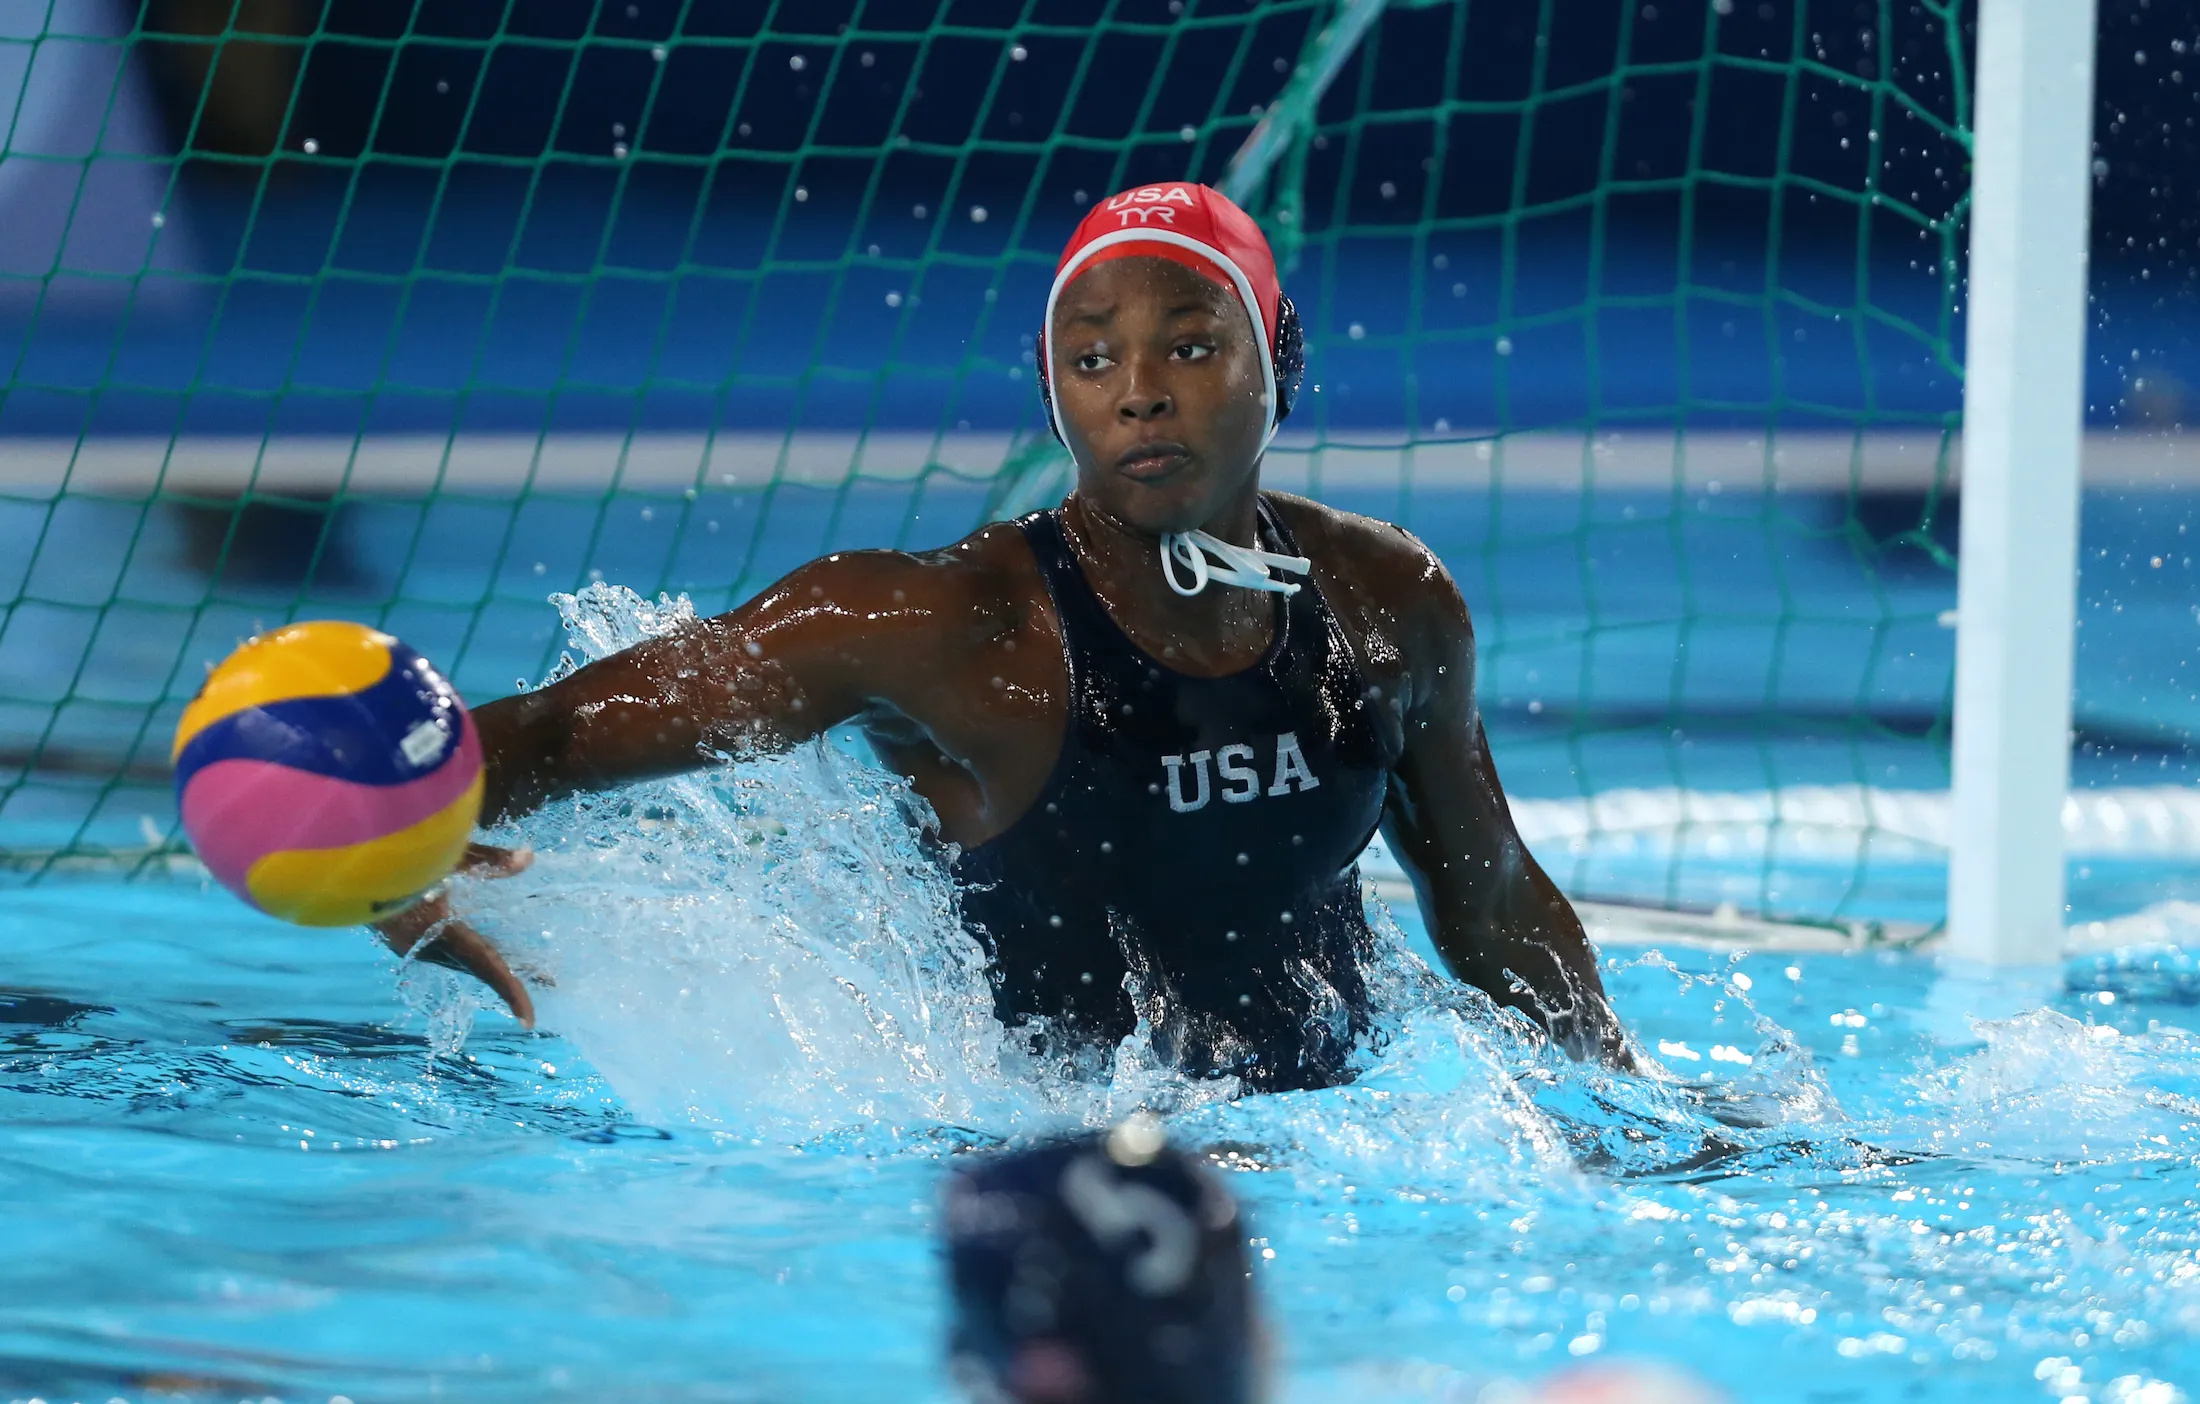 Water Polo: Ashleigh Johnson, An American poloist considered by many to be the best goalkeeper in the world. 2200x1410 HD Wallpaper.